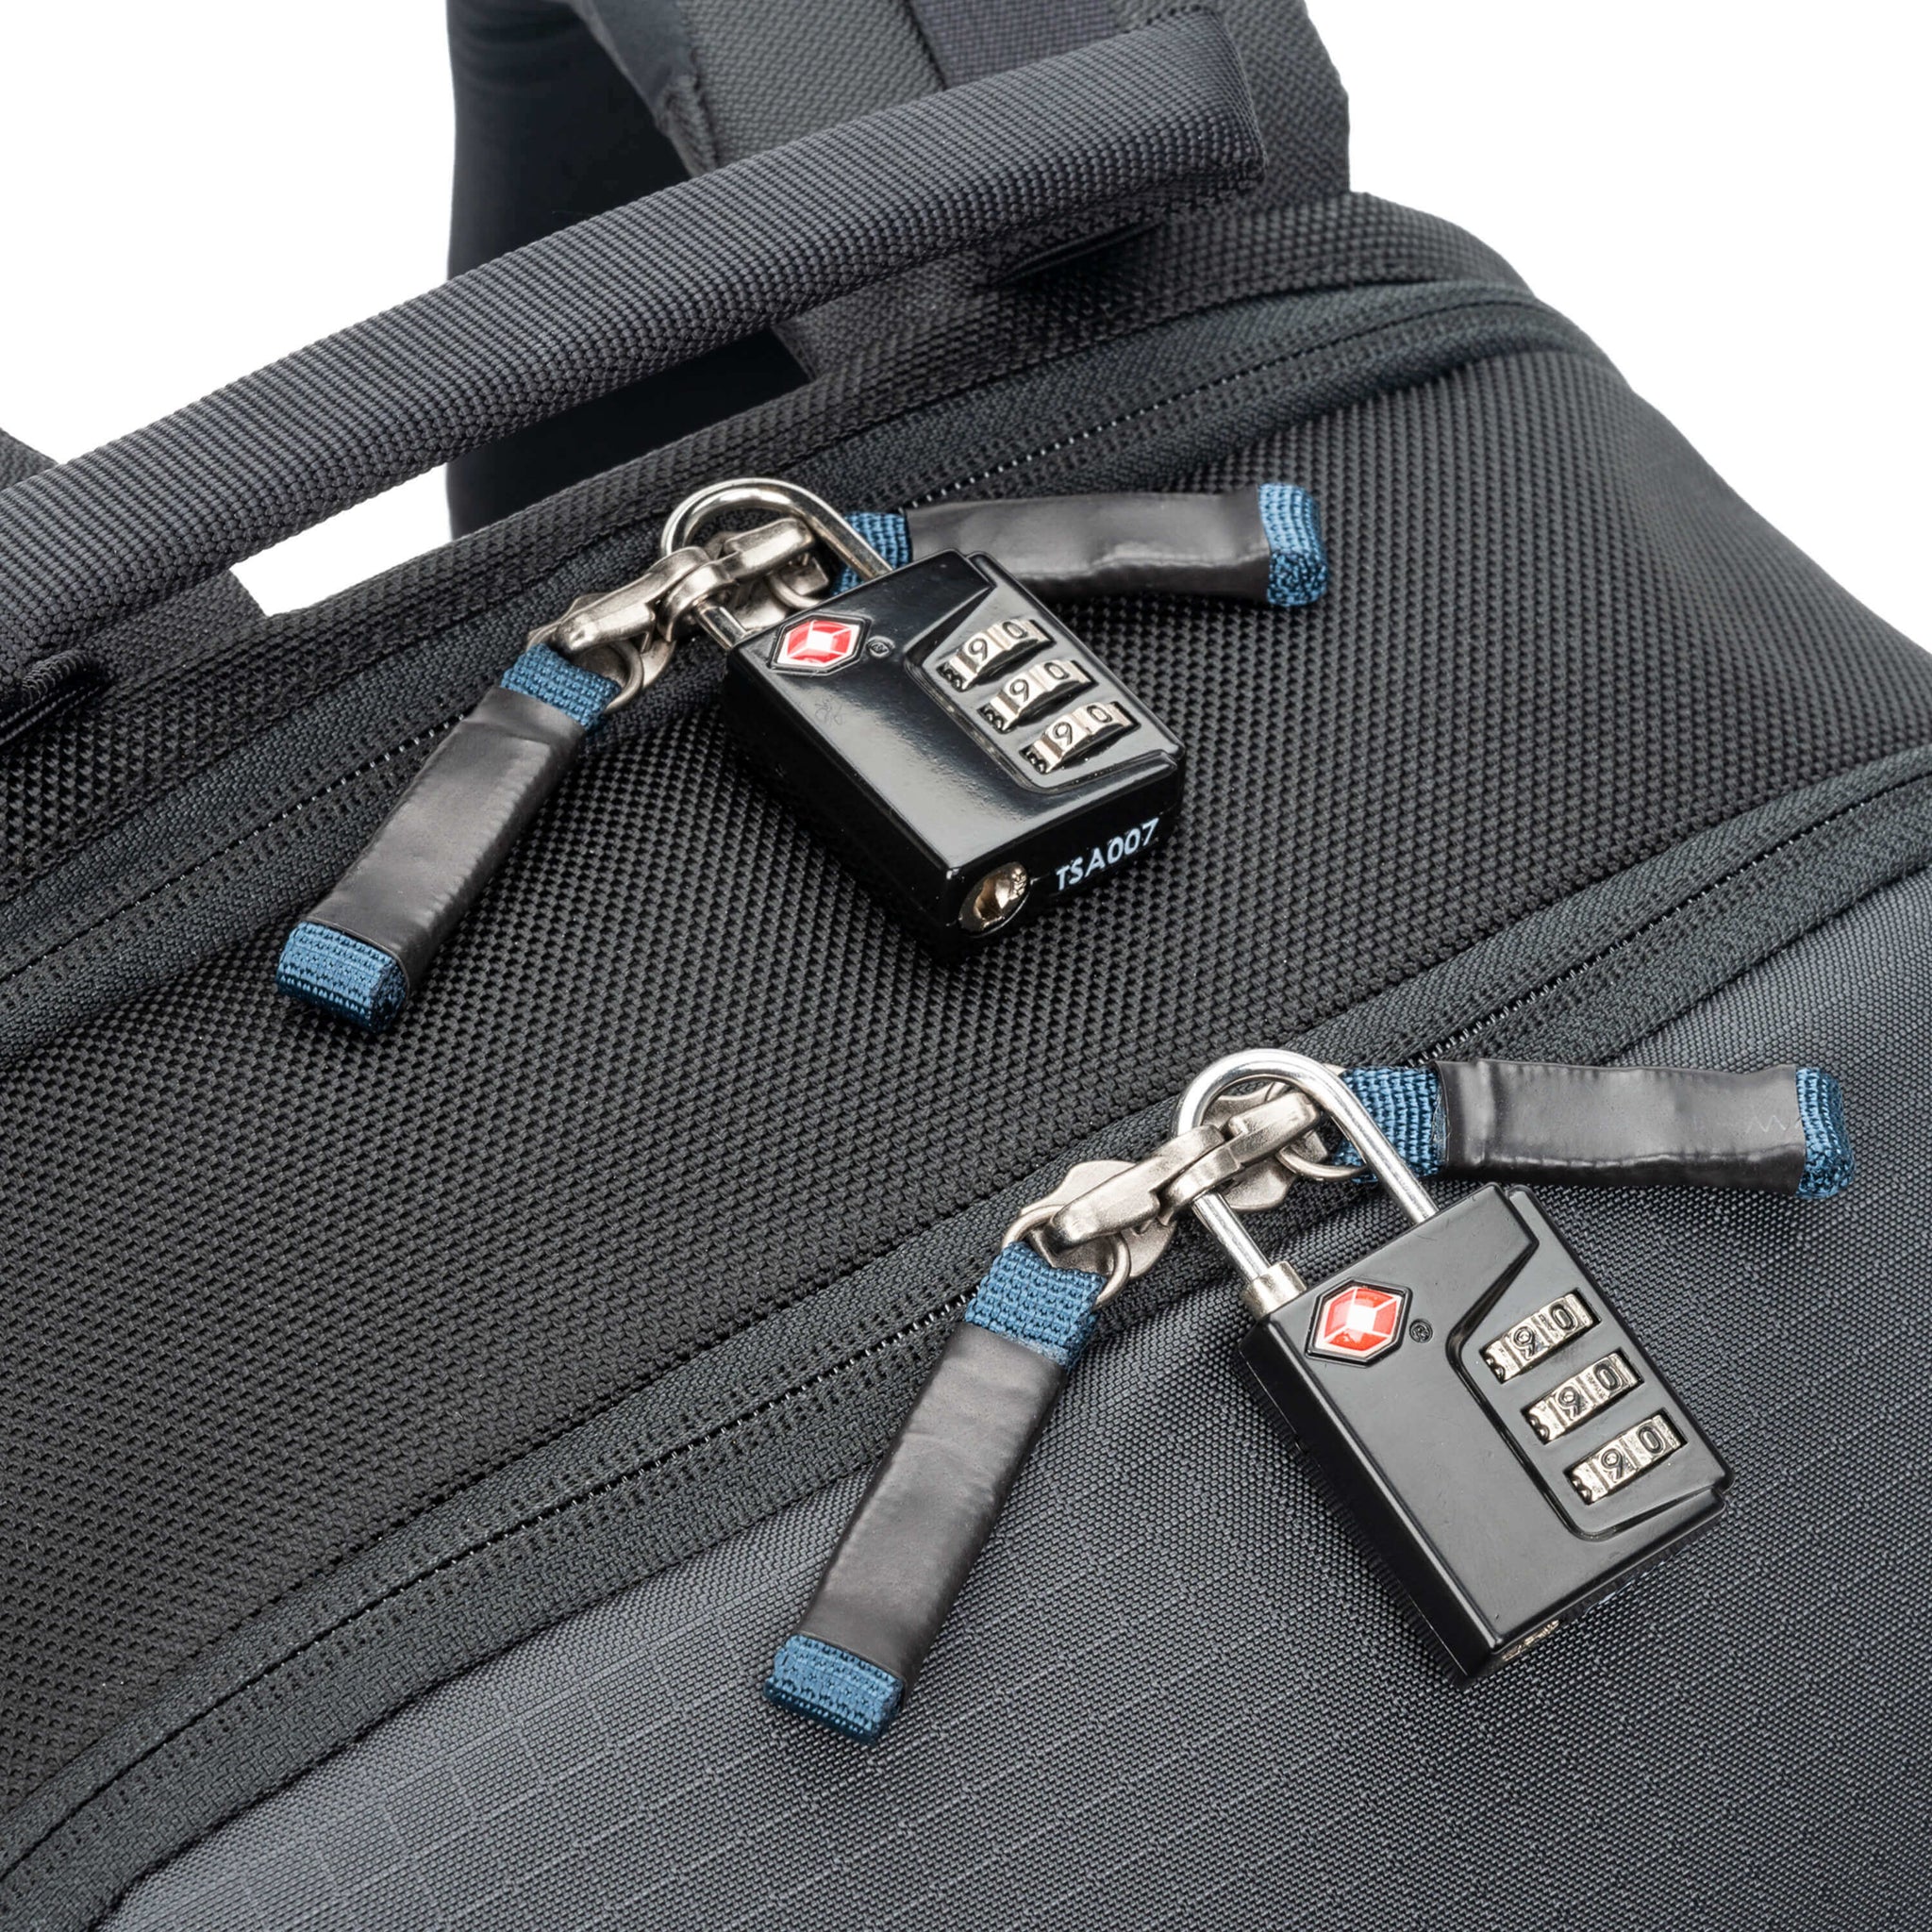 Locking zippers on both compartments (locks not included)